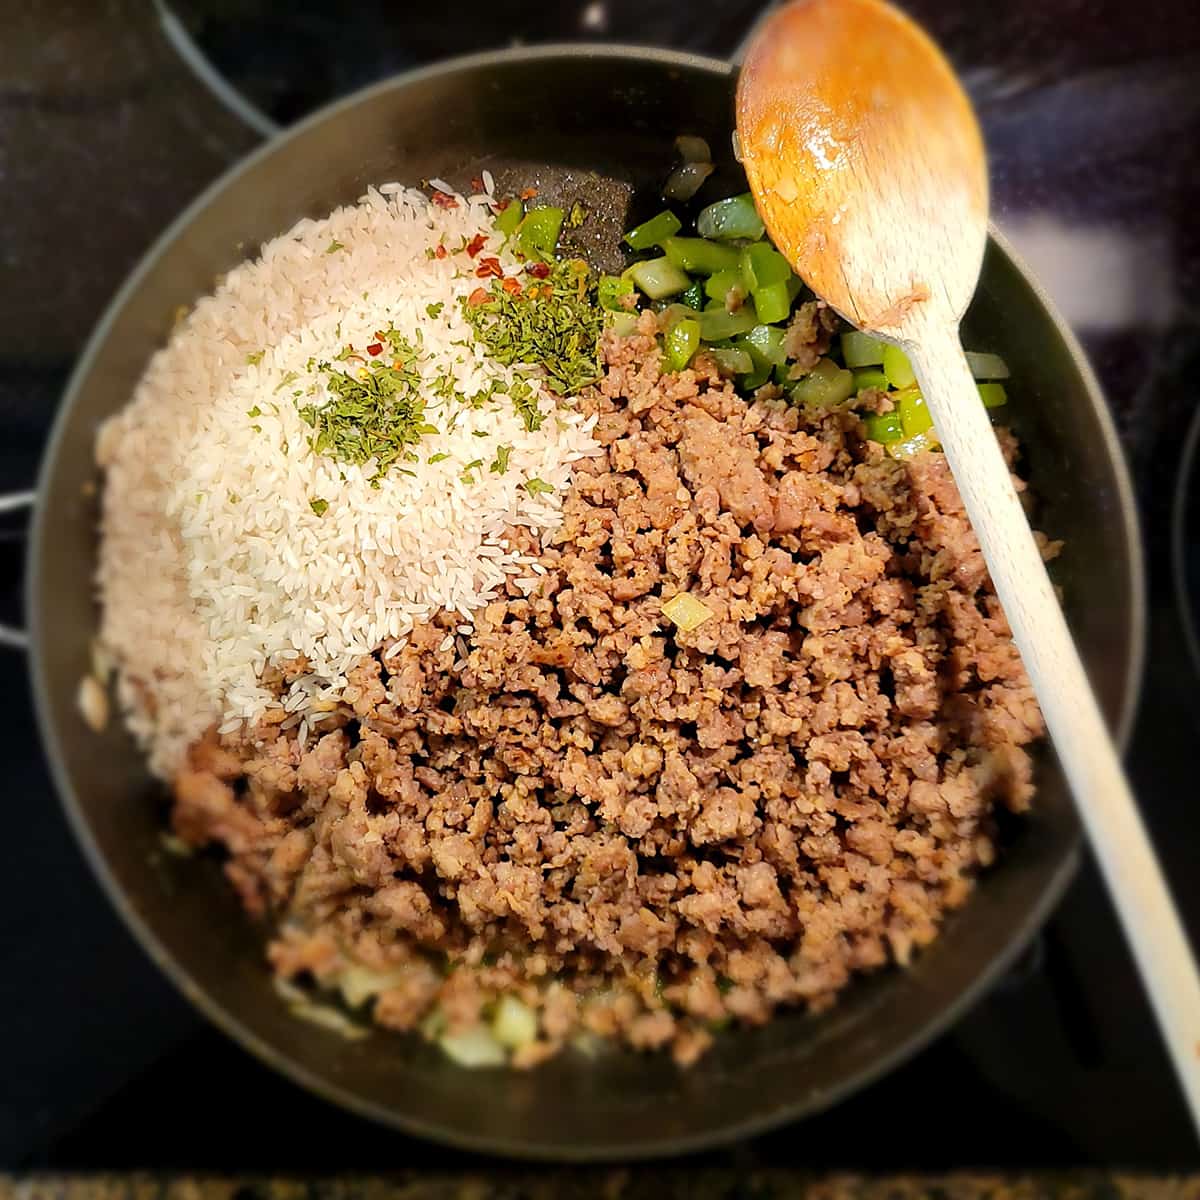 Rice and seasonings added to skillet.